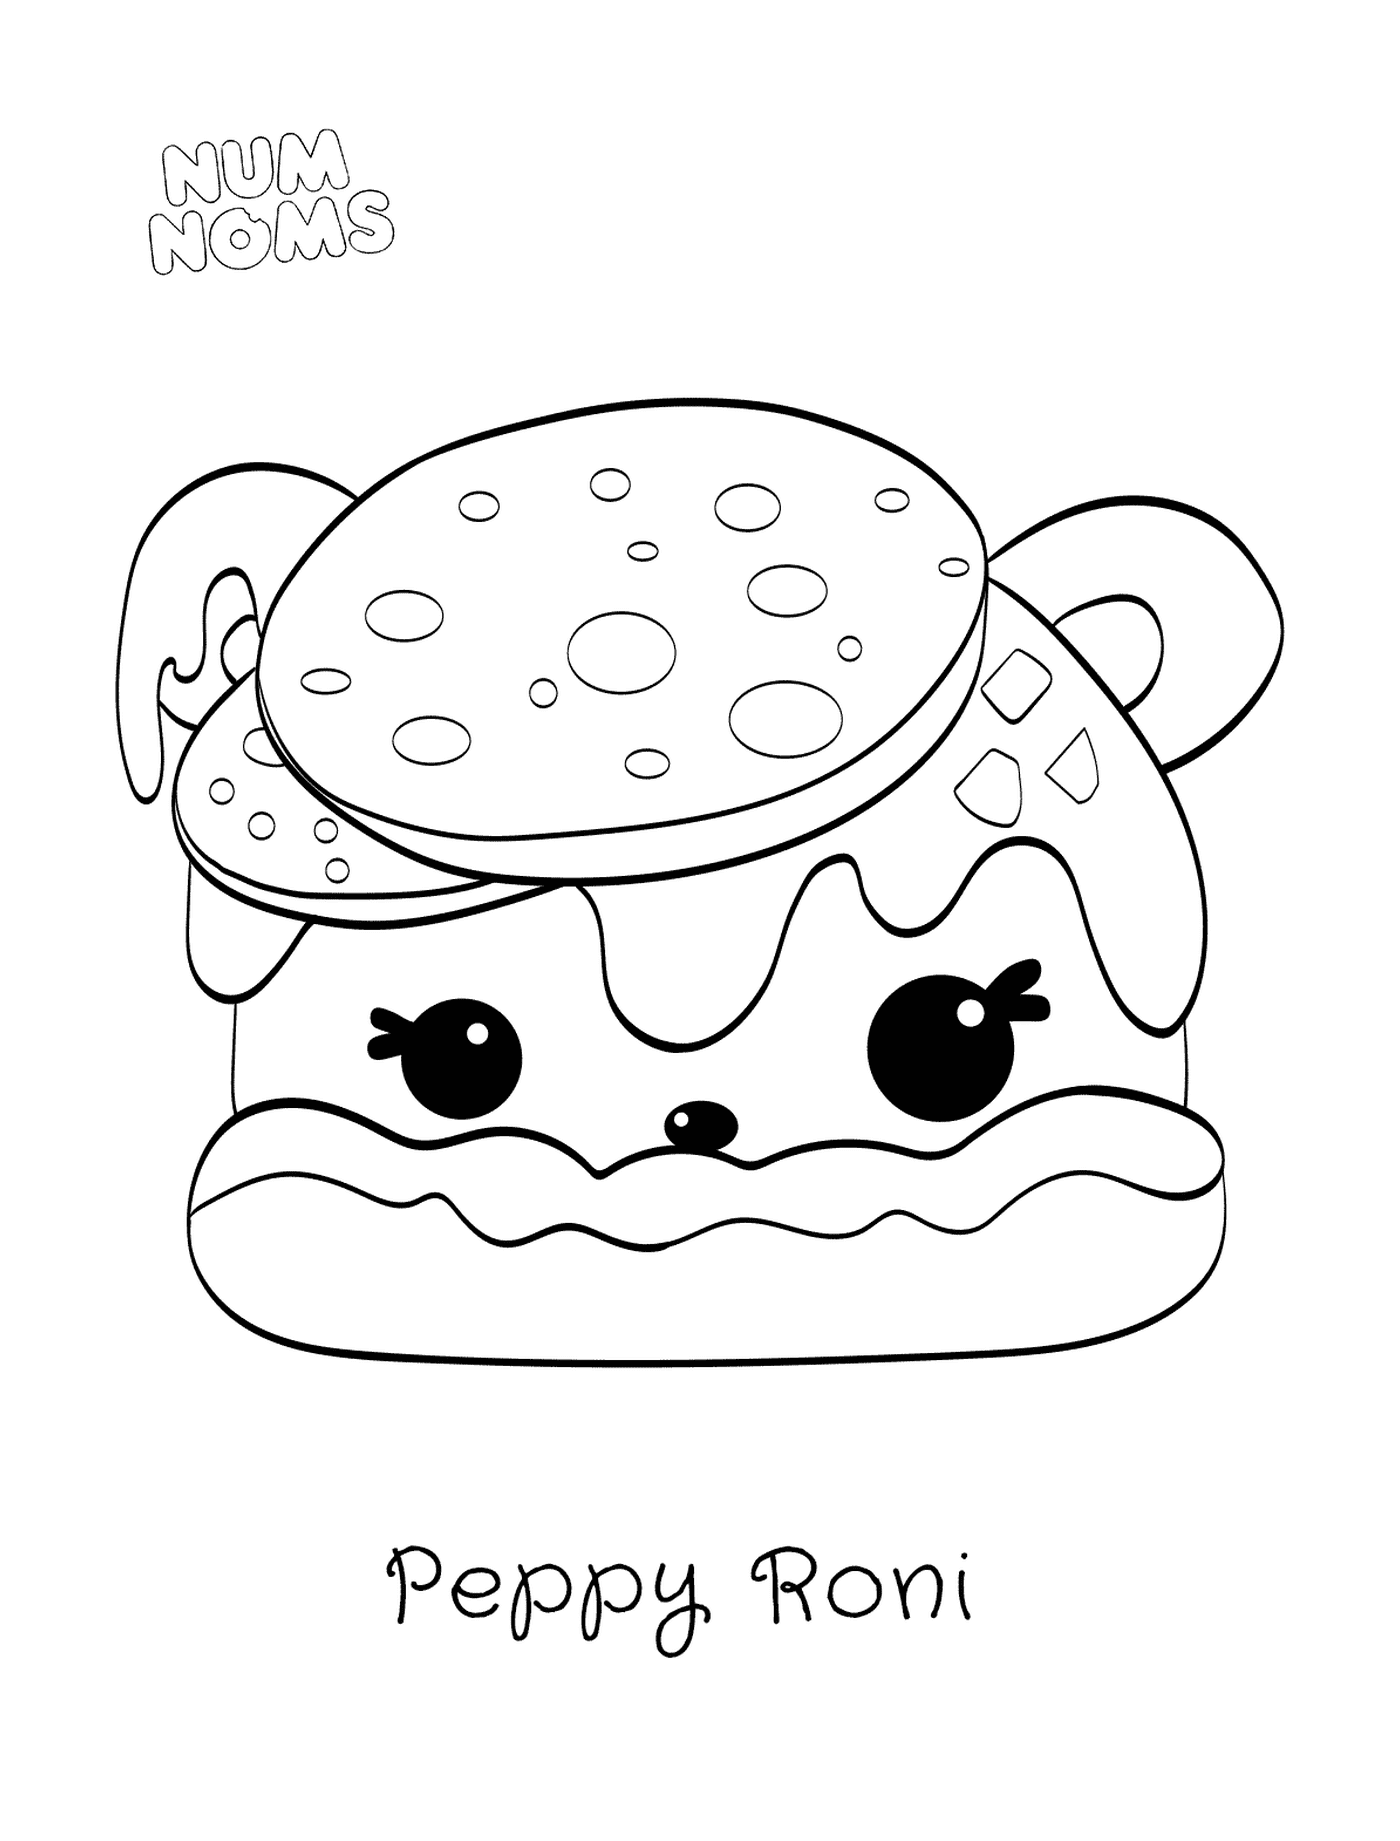  Pizza Peppy Roni by Num Names 